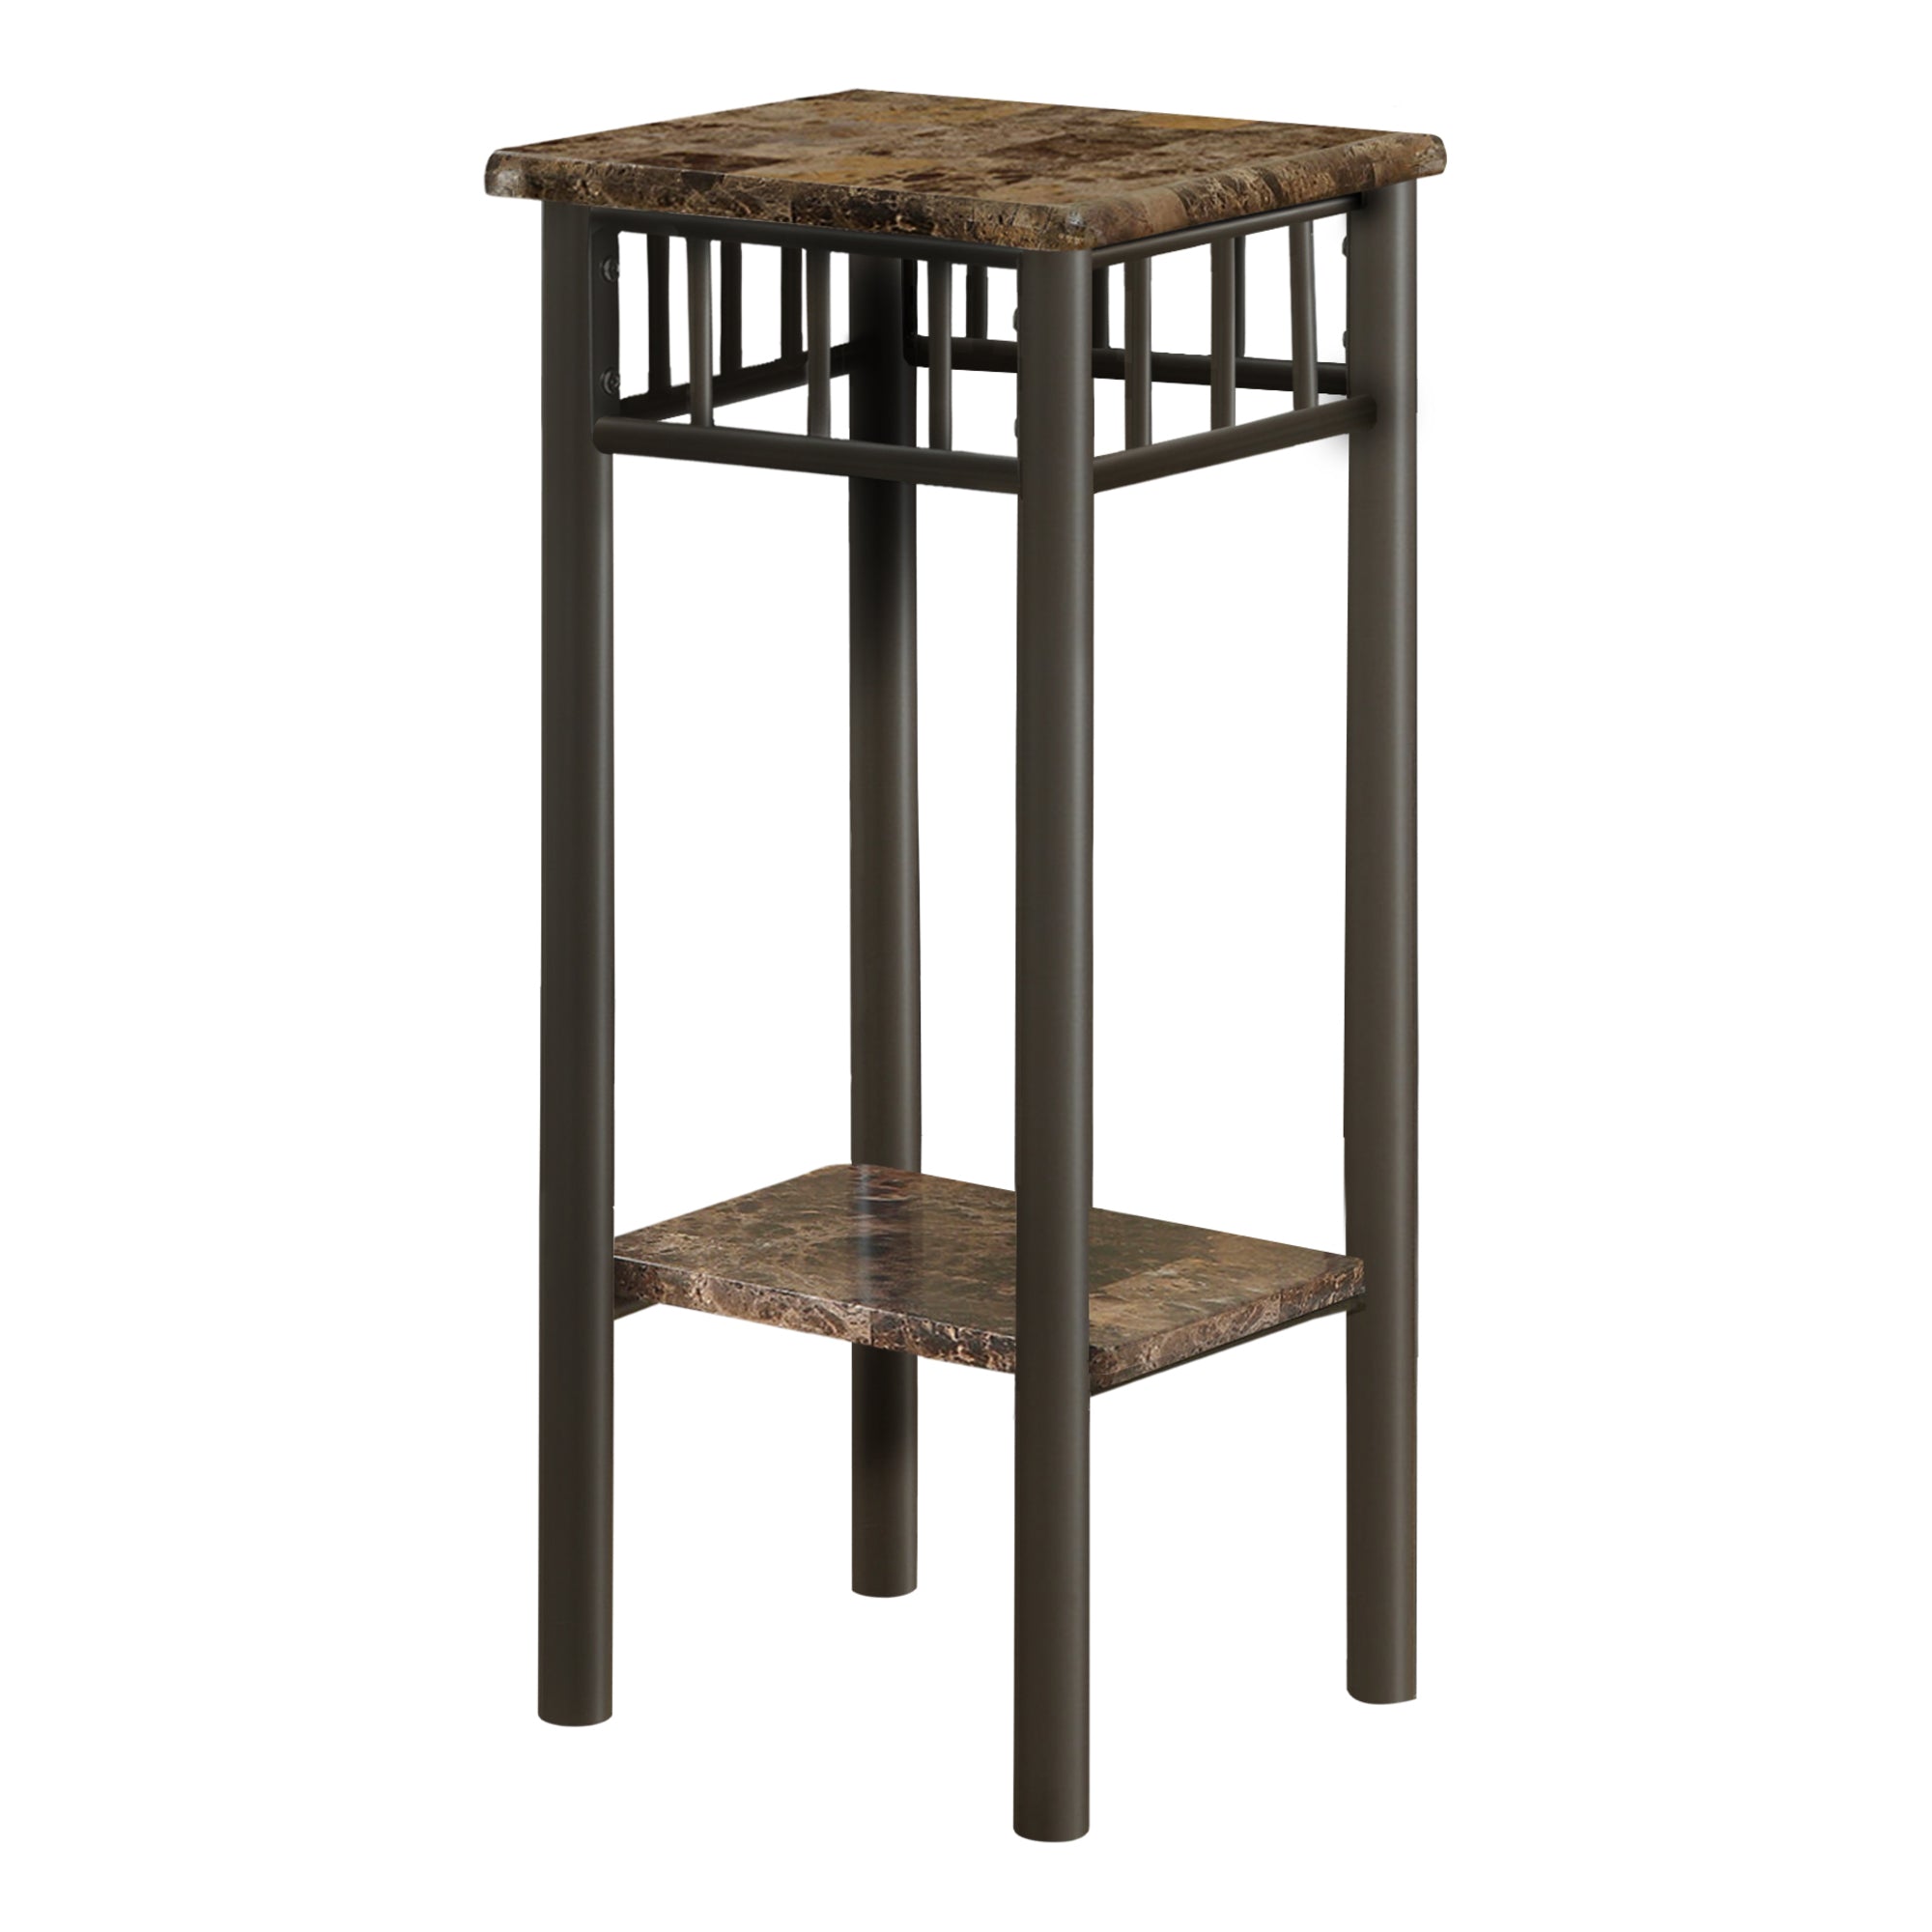 MN-903044    Accent Table, Side, End, Plant Stand, Square, Living Room, Bedroom, Metal Legs, Laminate, Brown Marble Look, Bronze, Contemporary, Modern